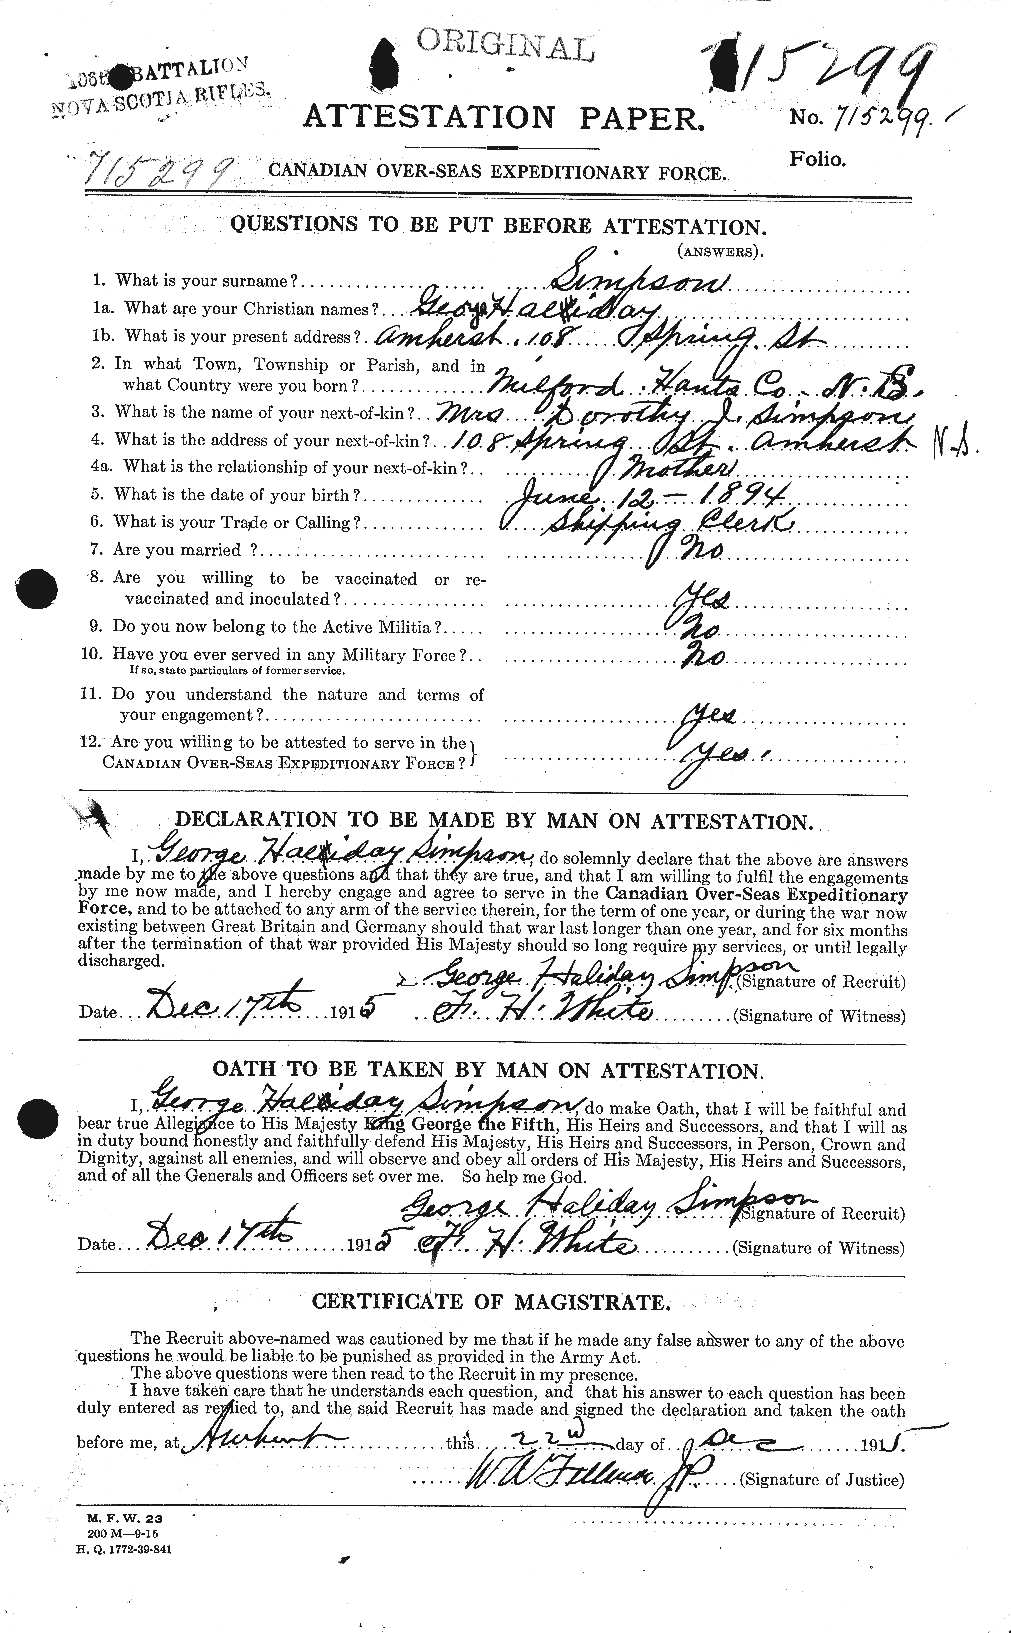 Personnel Records of the First World War - CEF 100428a